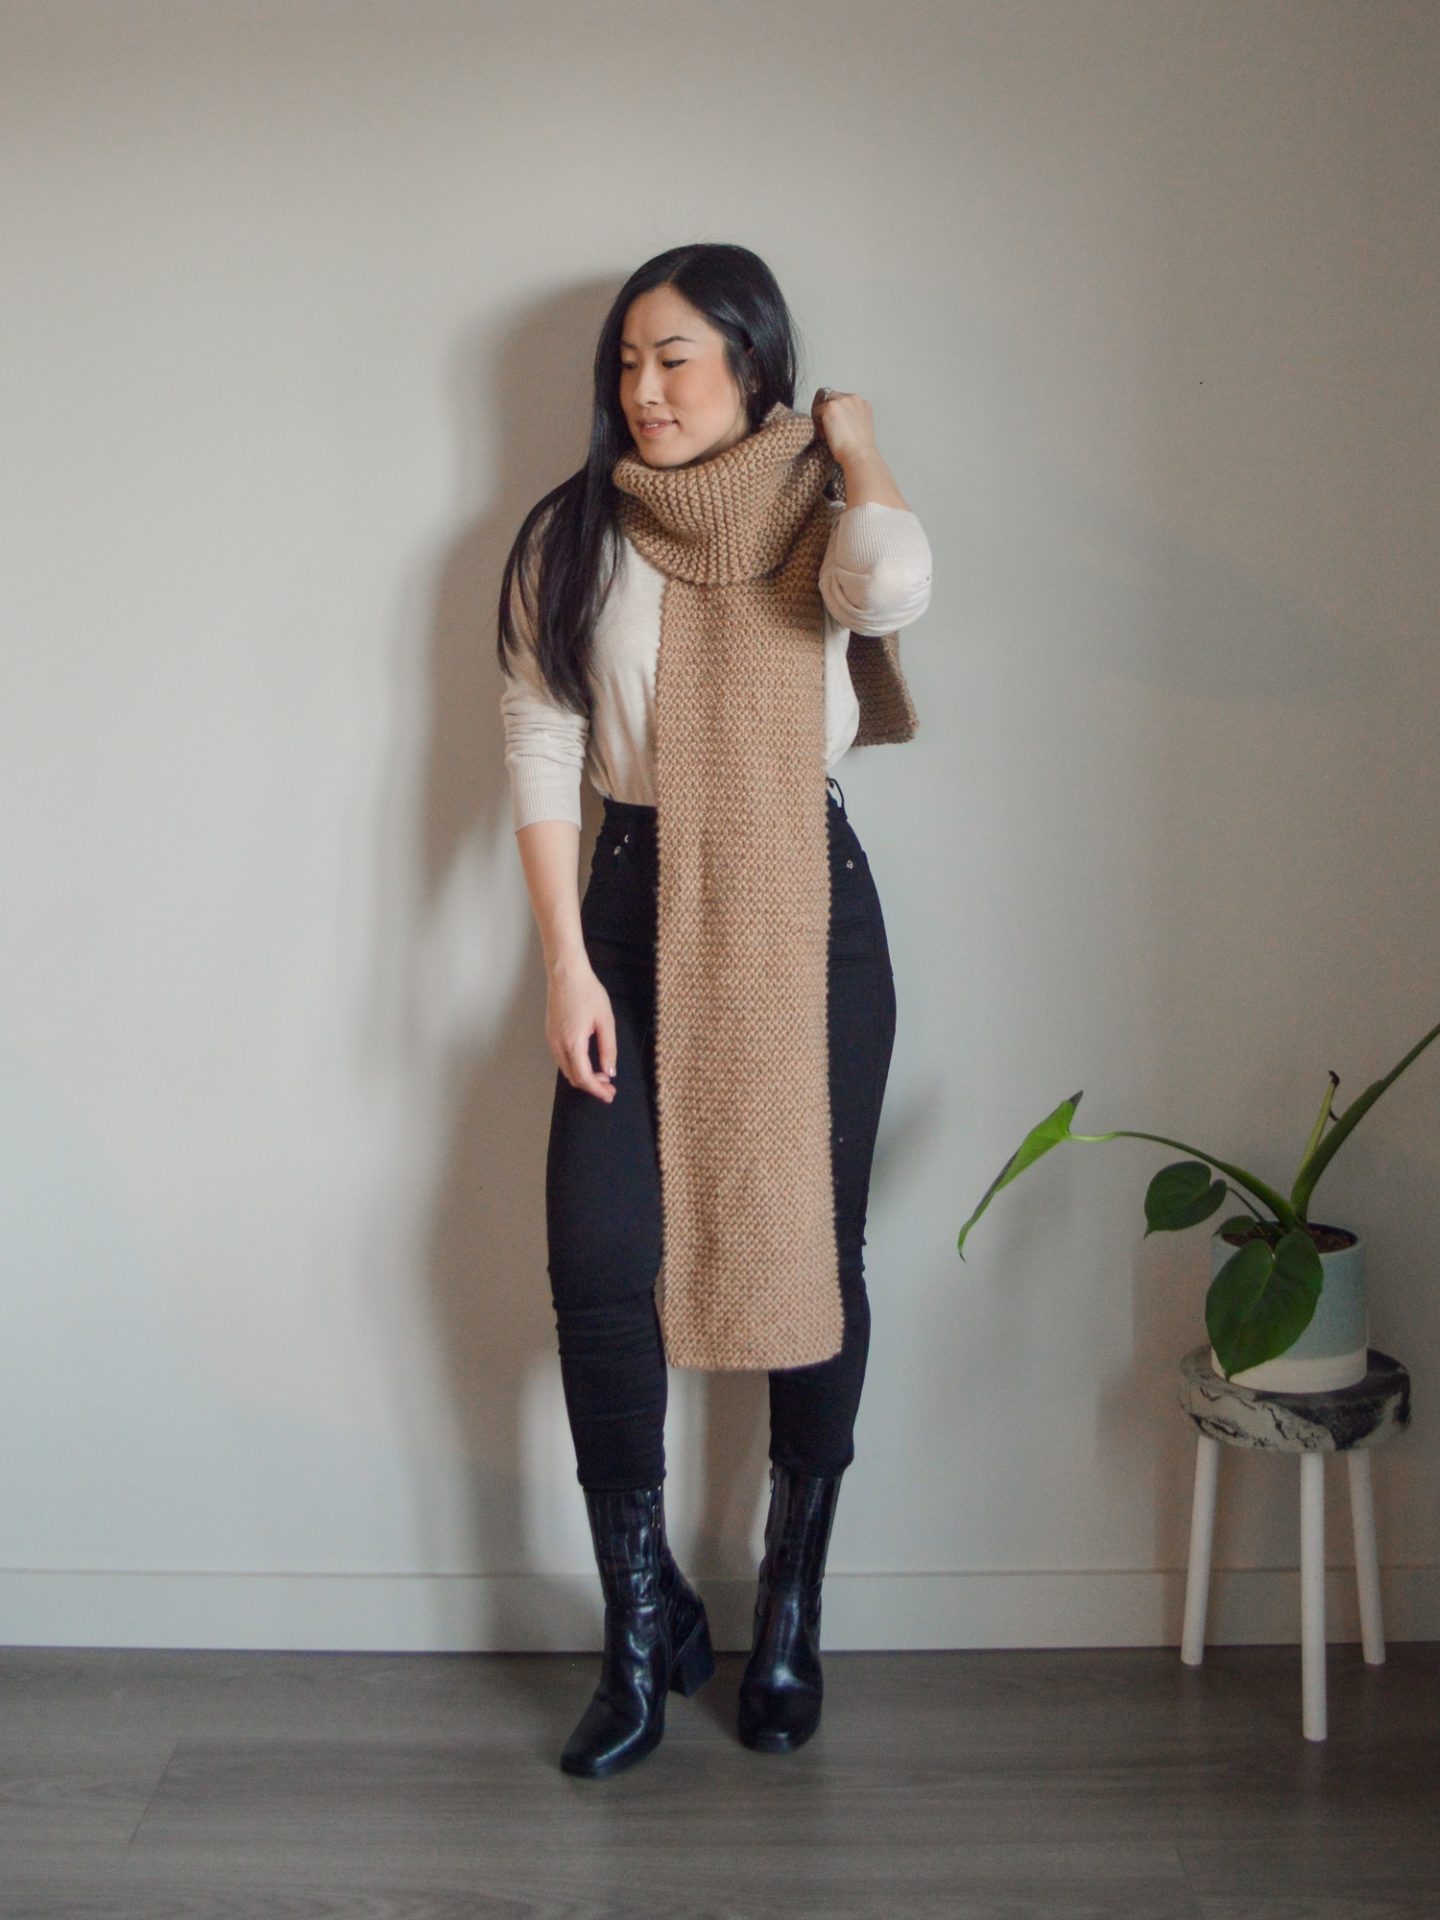 Outfit Consisting of Frank and Oak V-Neck Sweater and Agolde Roxanne Jeans, and an Oversized Knitted Scarf